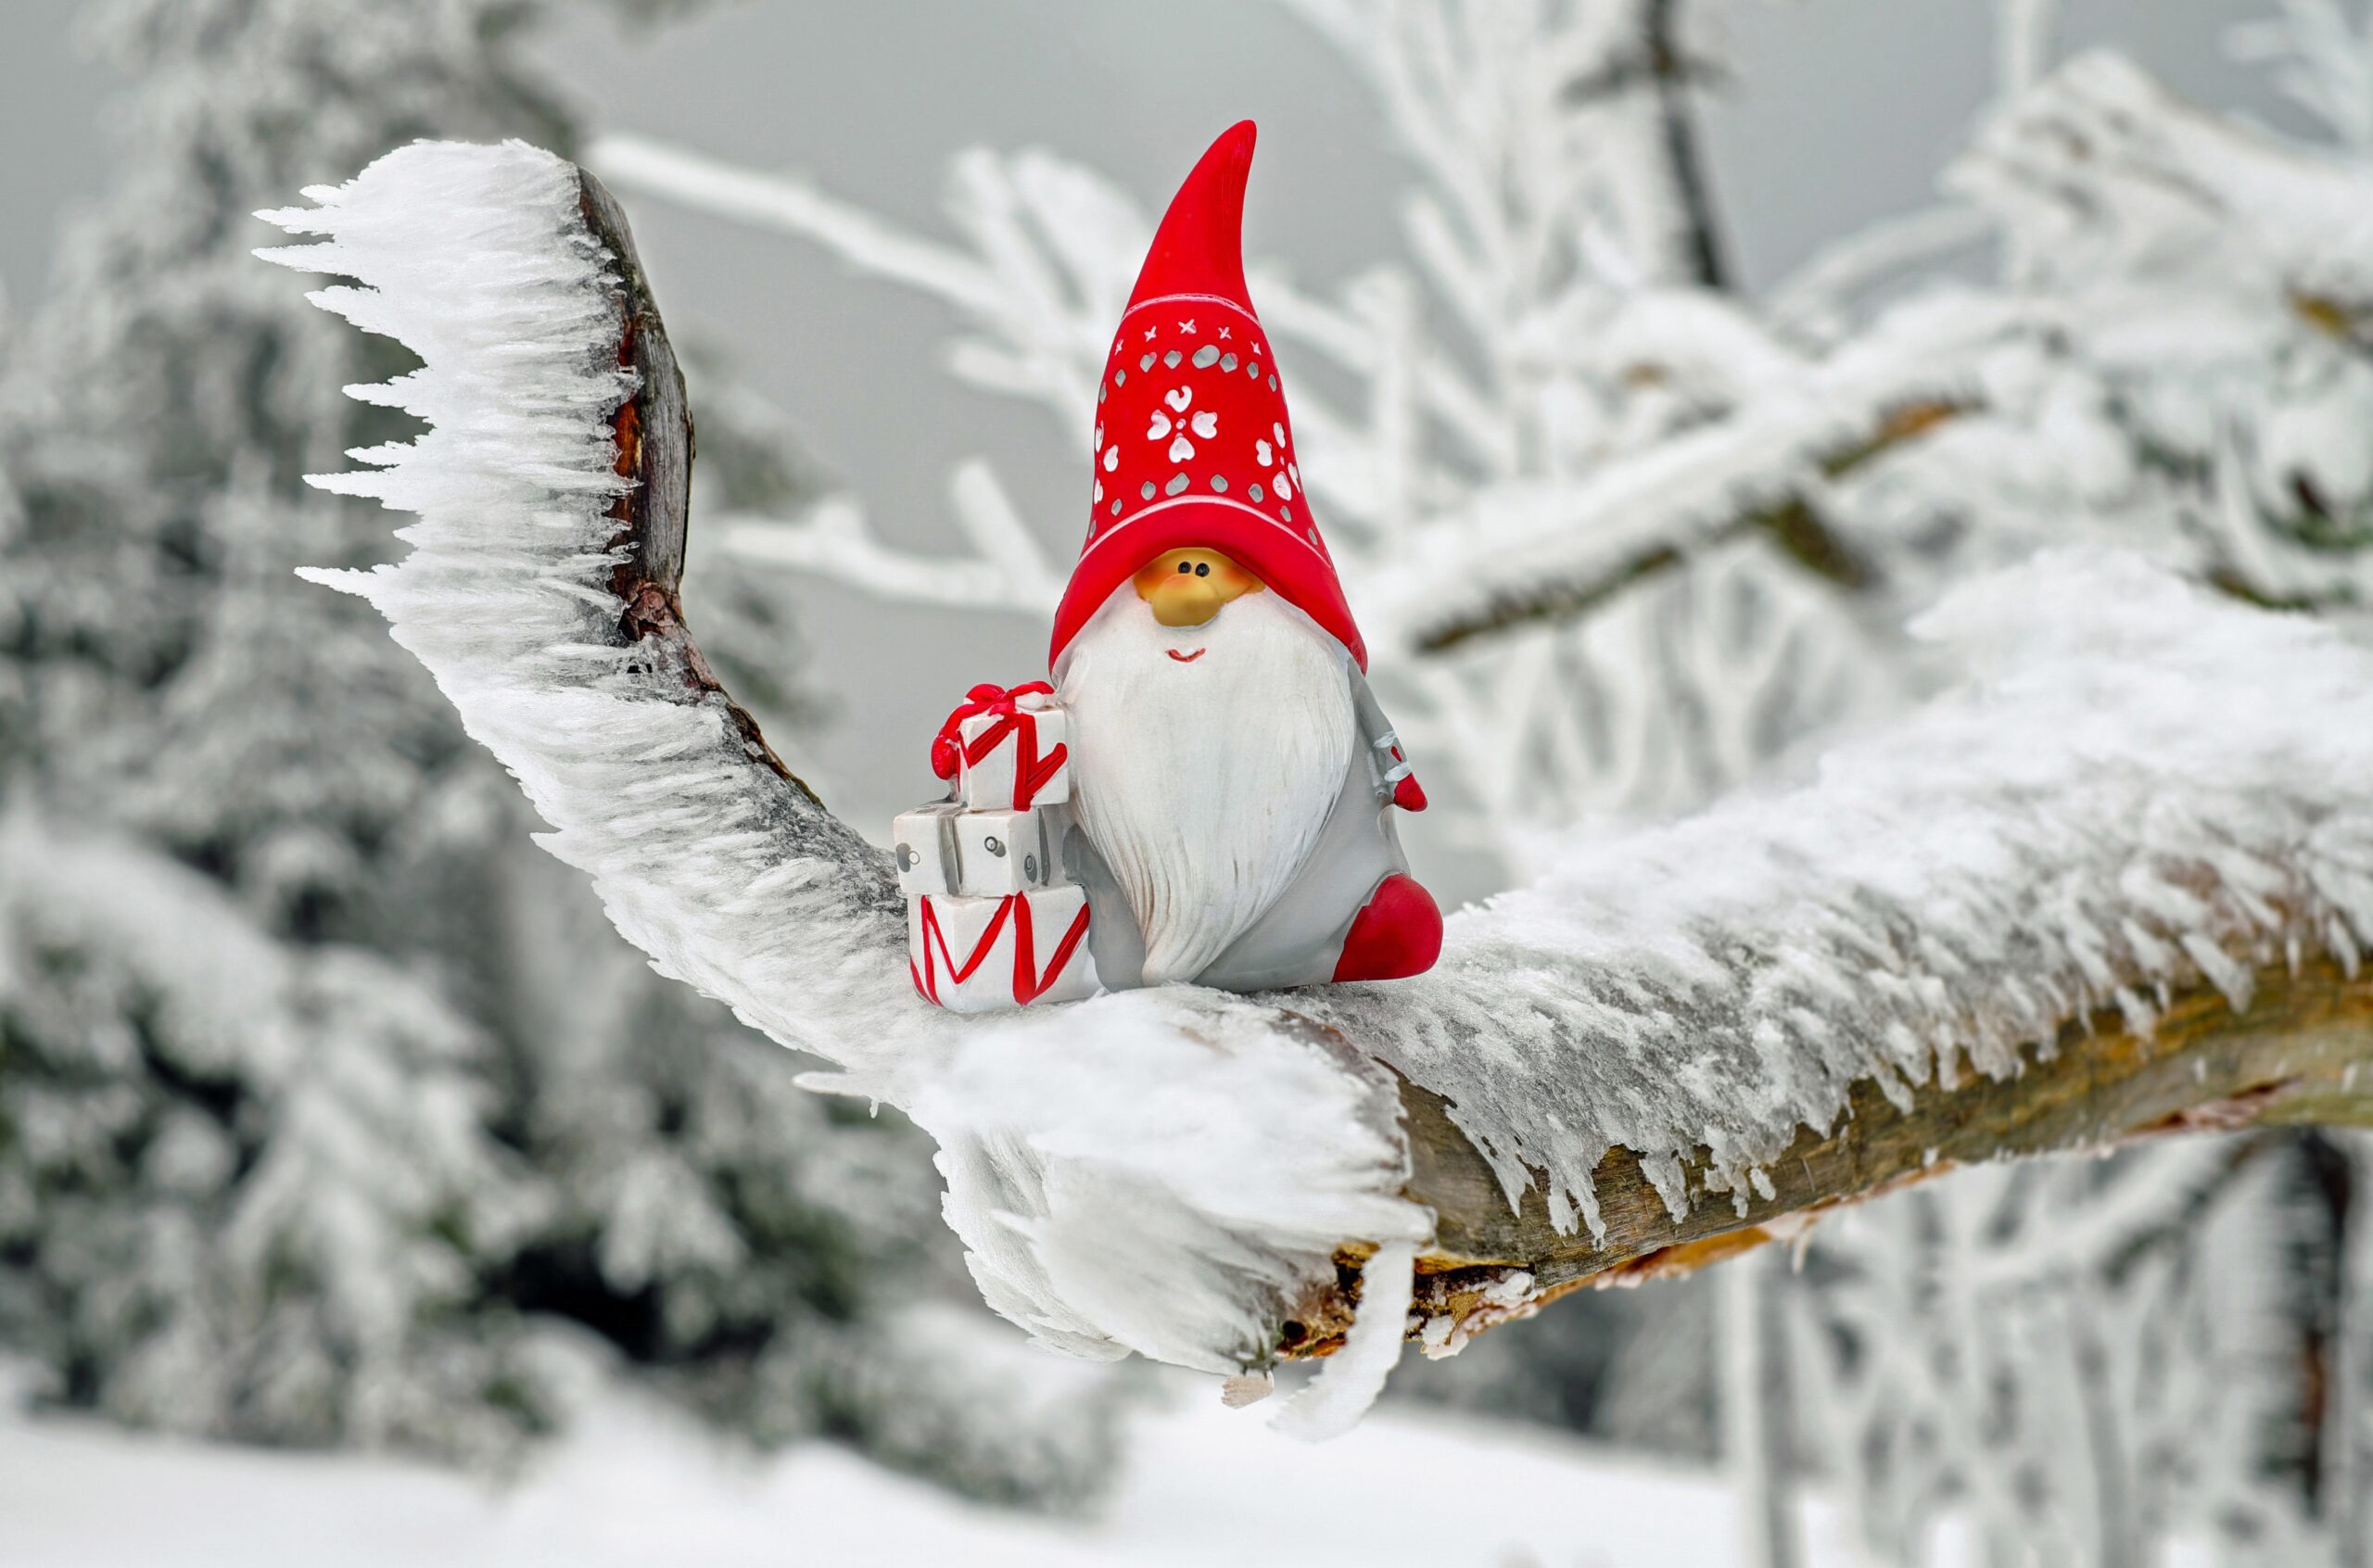 picture of santa claus toy on a snowy branch